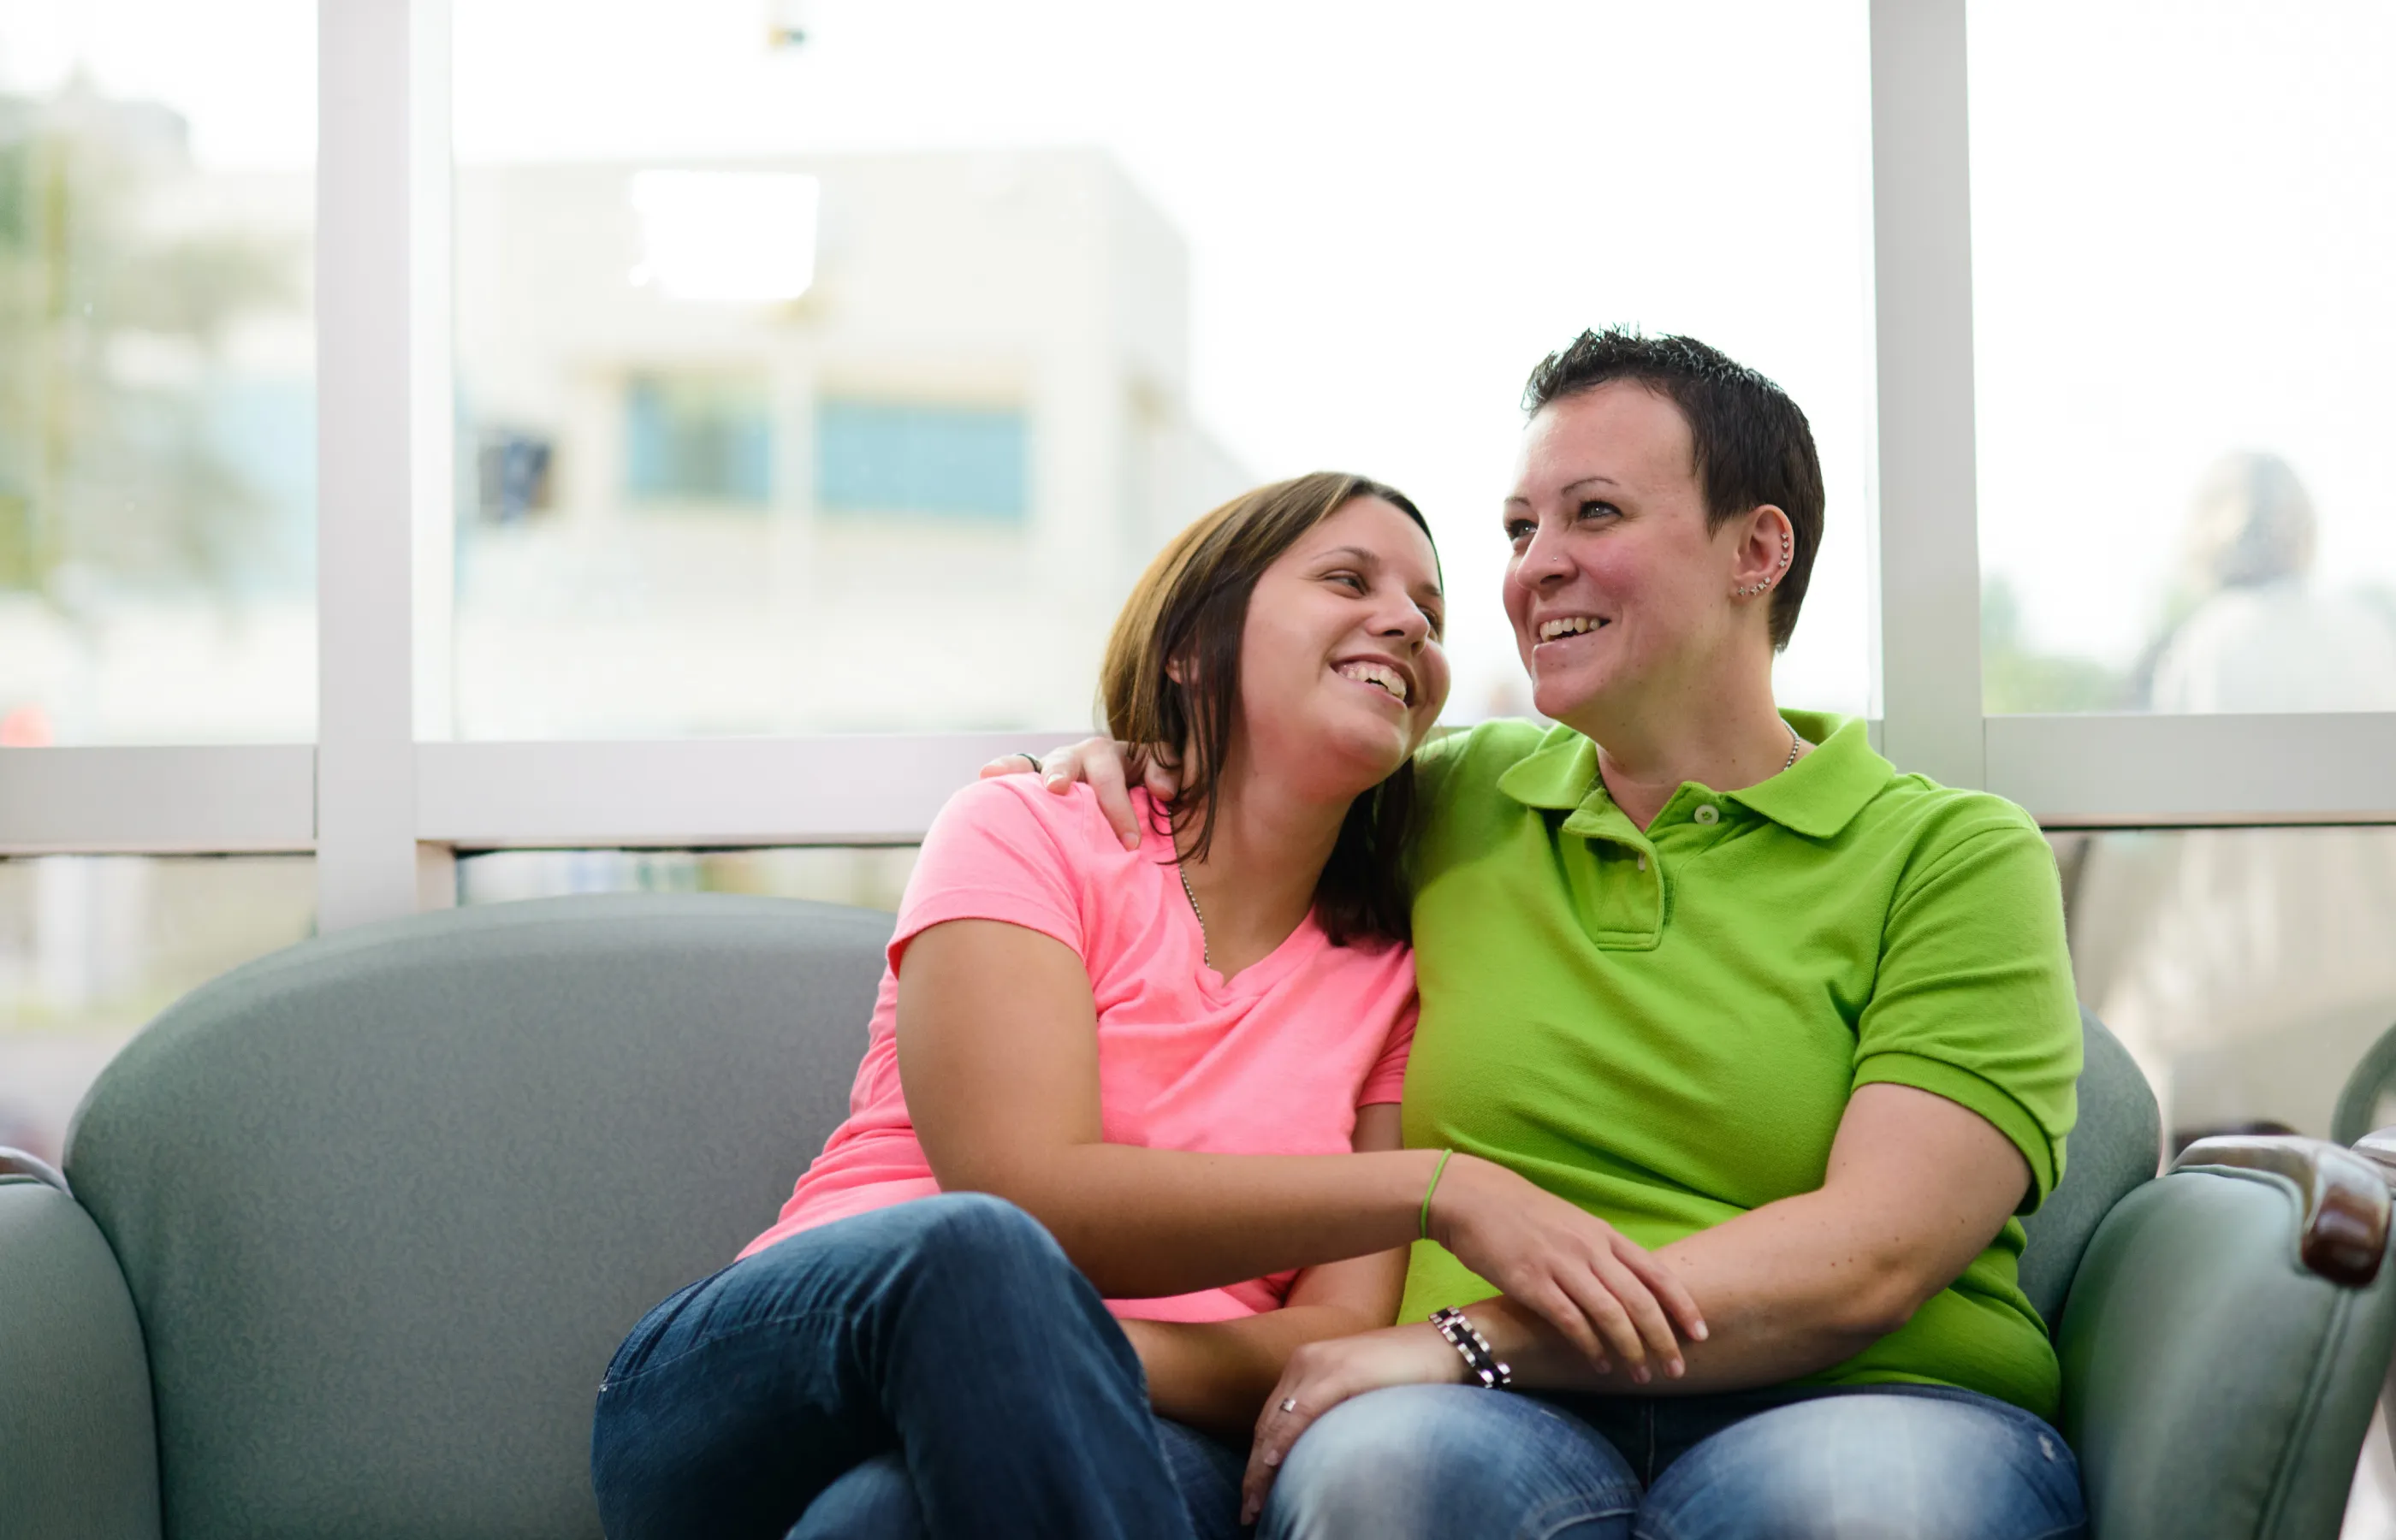 A same sex couple is sitting together on a couch, smiling, and embracing each other. 